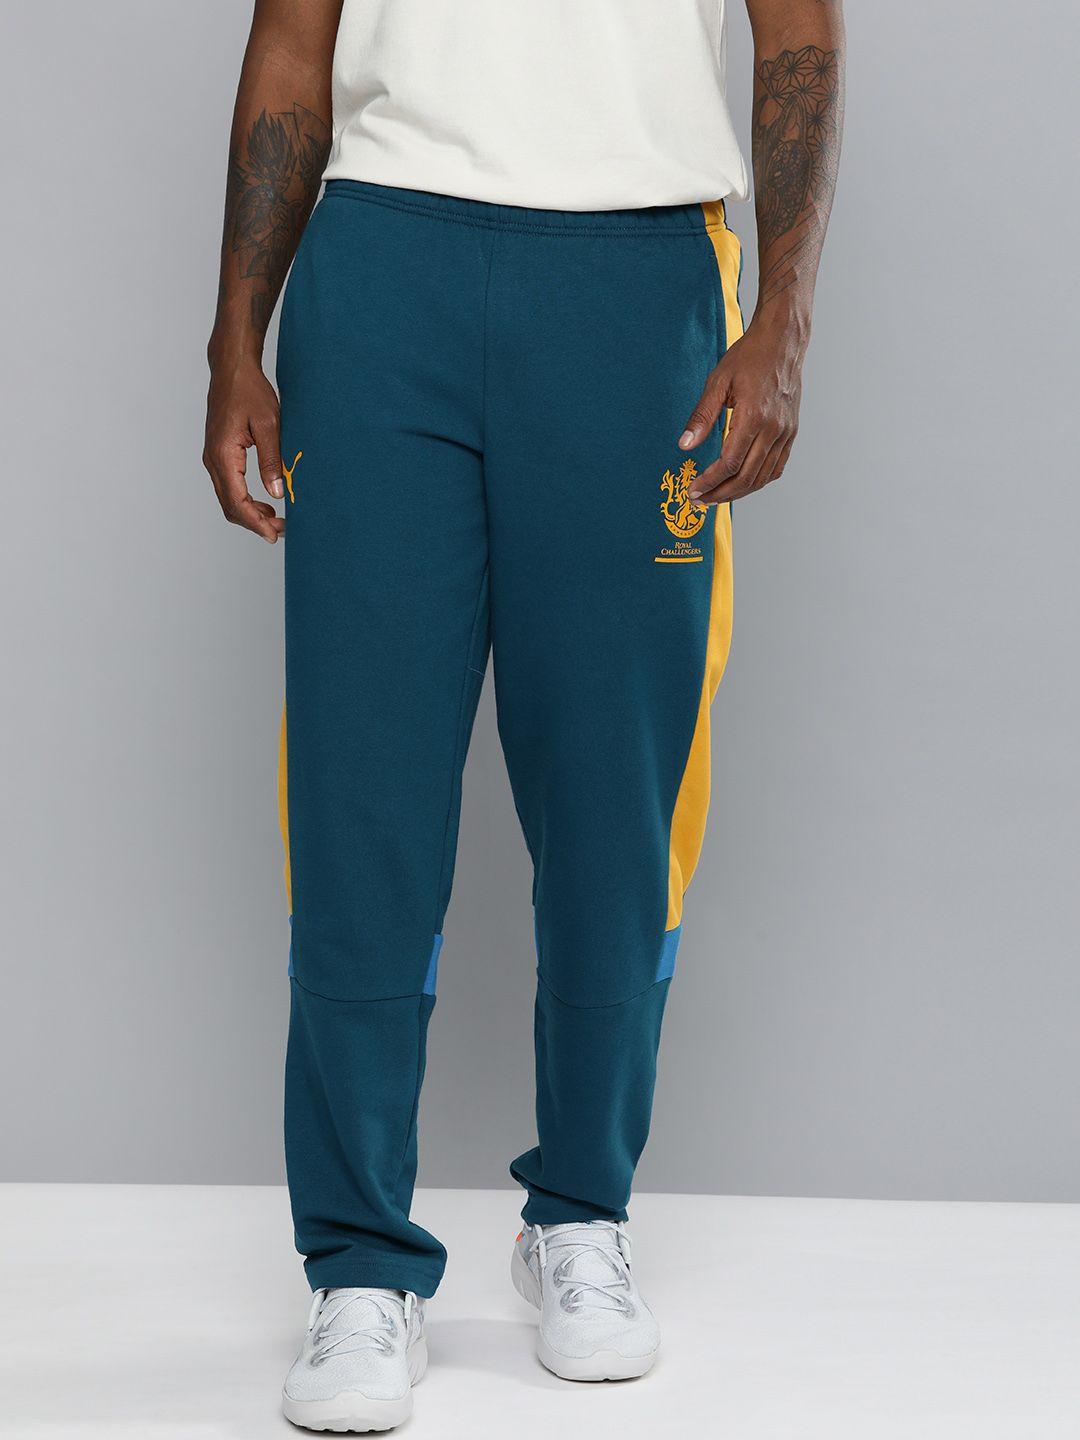 puma men blue & yellow printed rcb knitted track pants